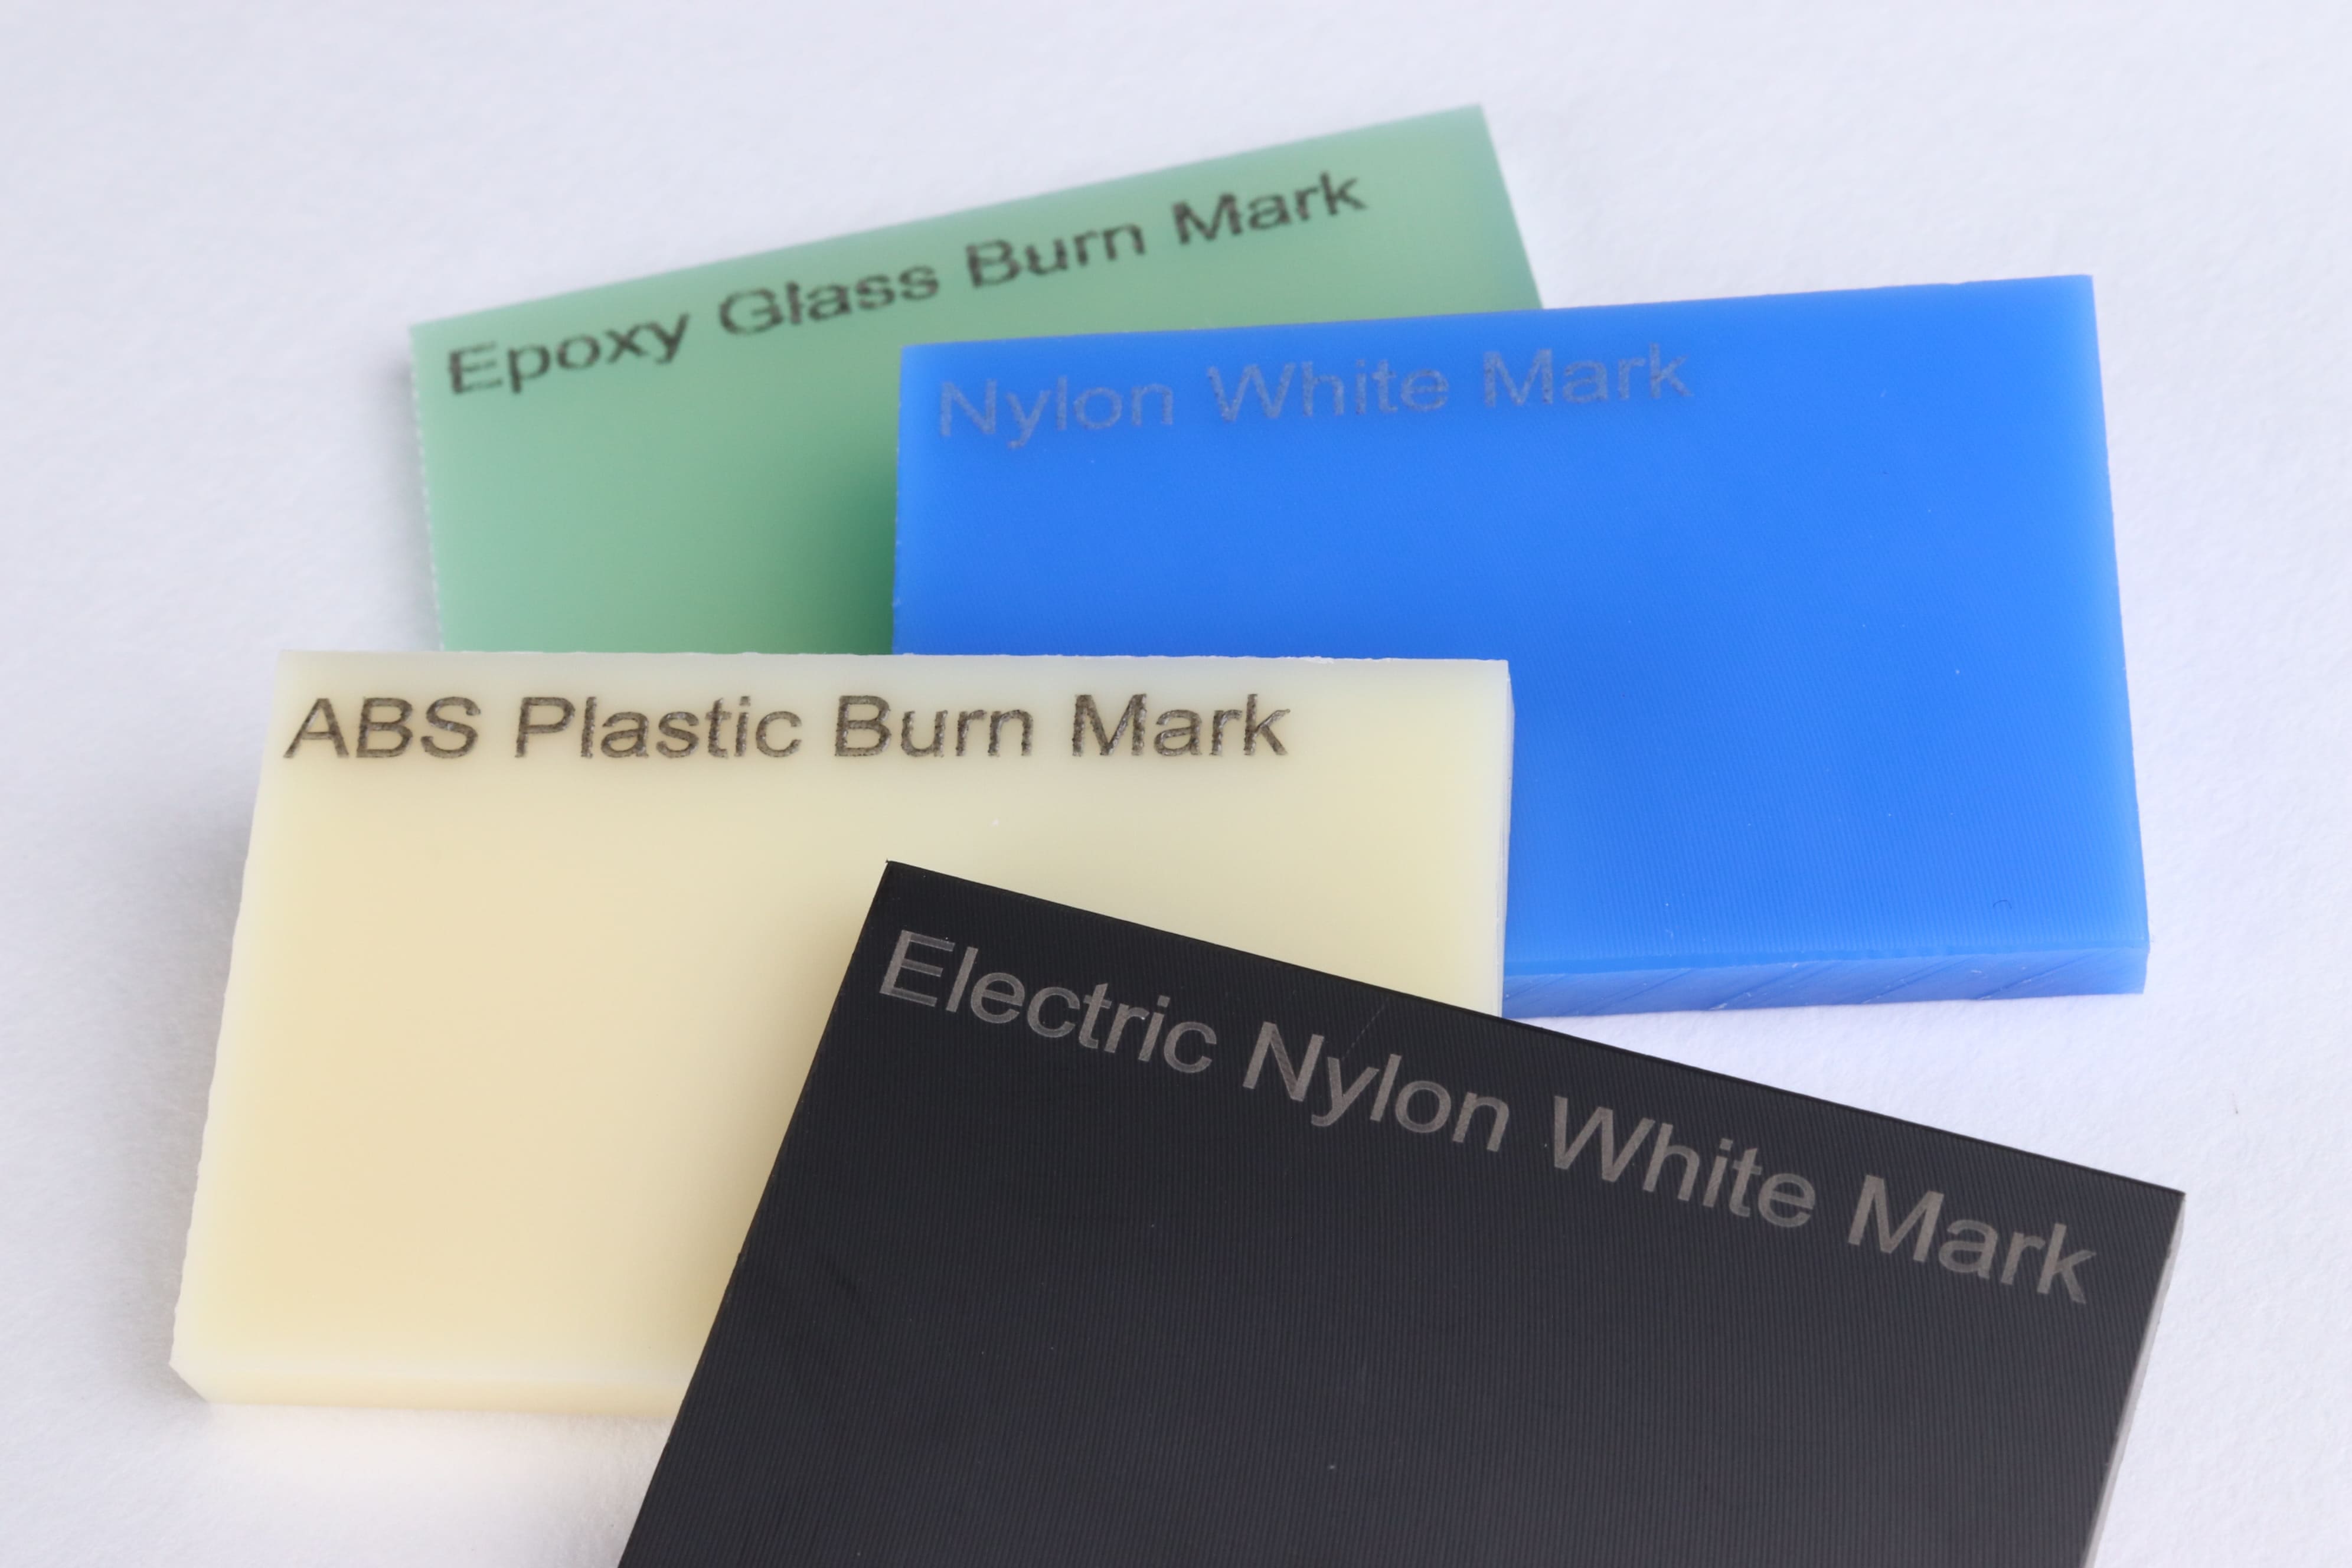 Image of four plastic materials engraved with the text 'Epoxy Glass Burn Mark', 'Nylon White Mark', 'ABS Plastic Burn Mark', and 'Electric Nylon White Mark', respectively.